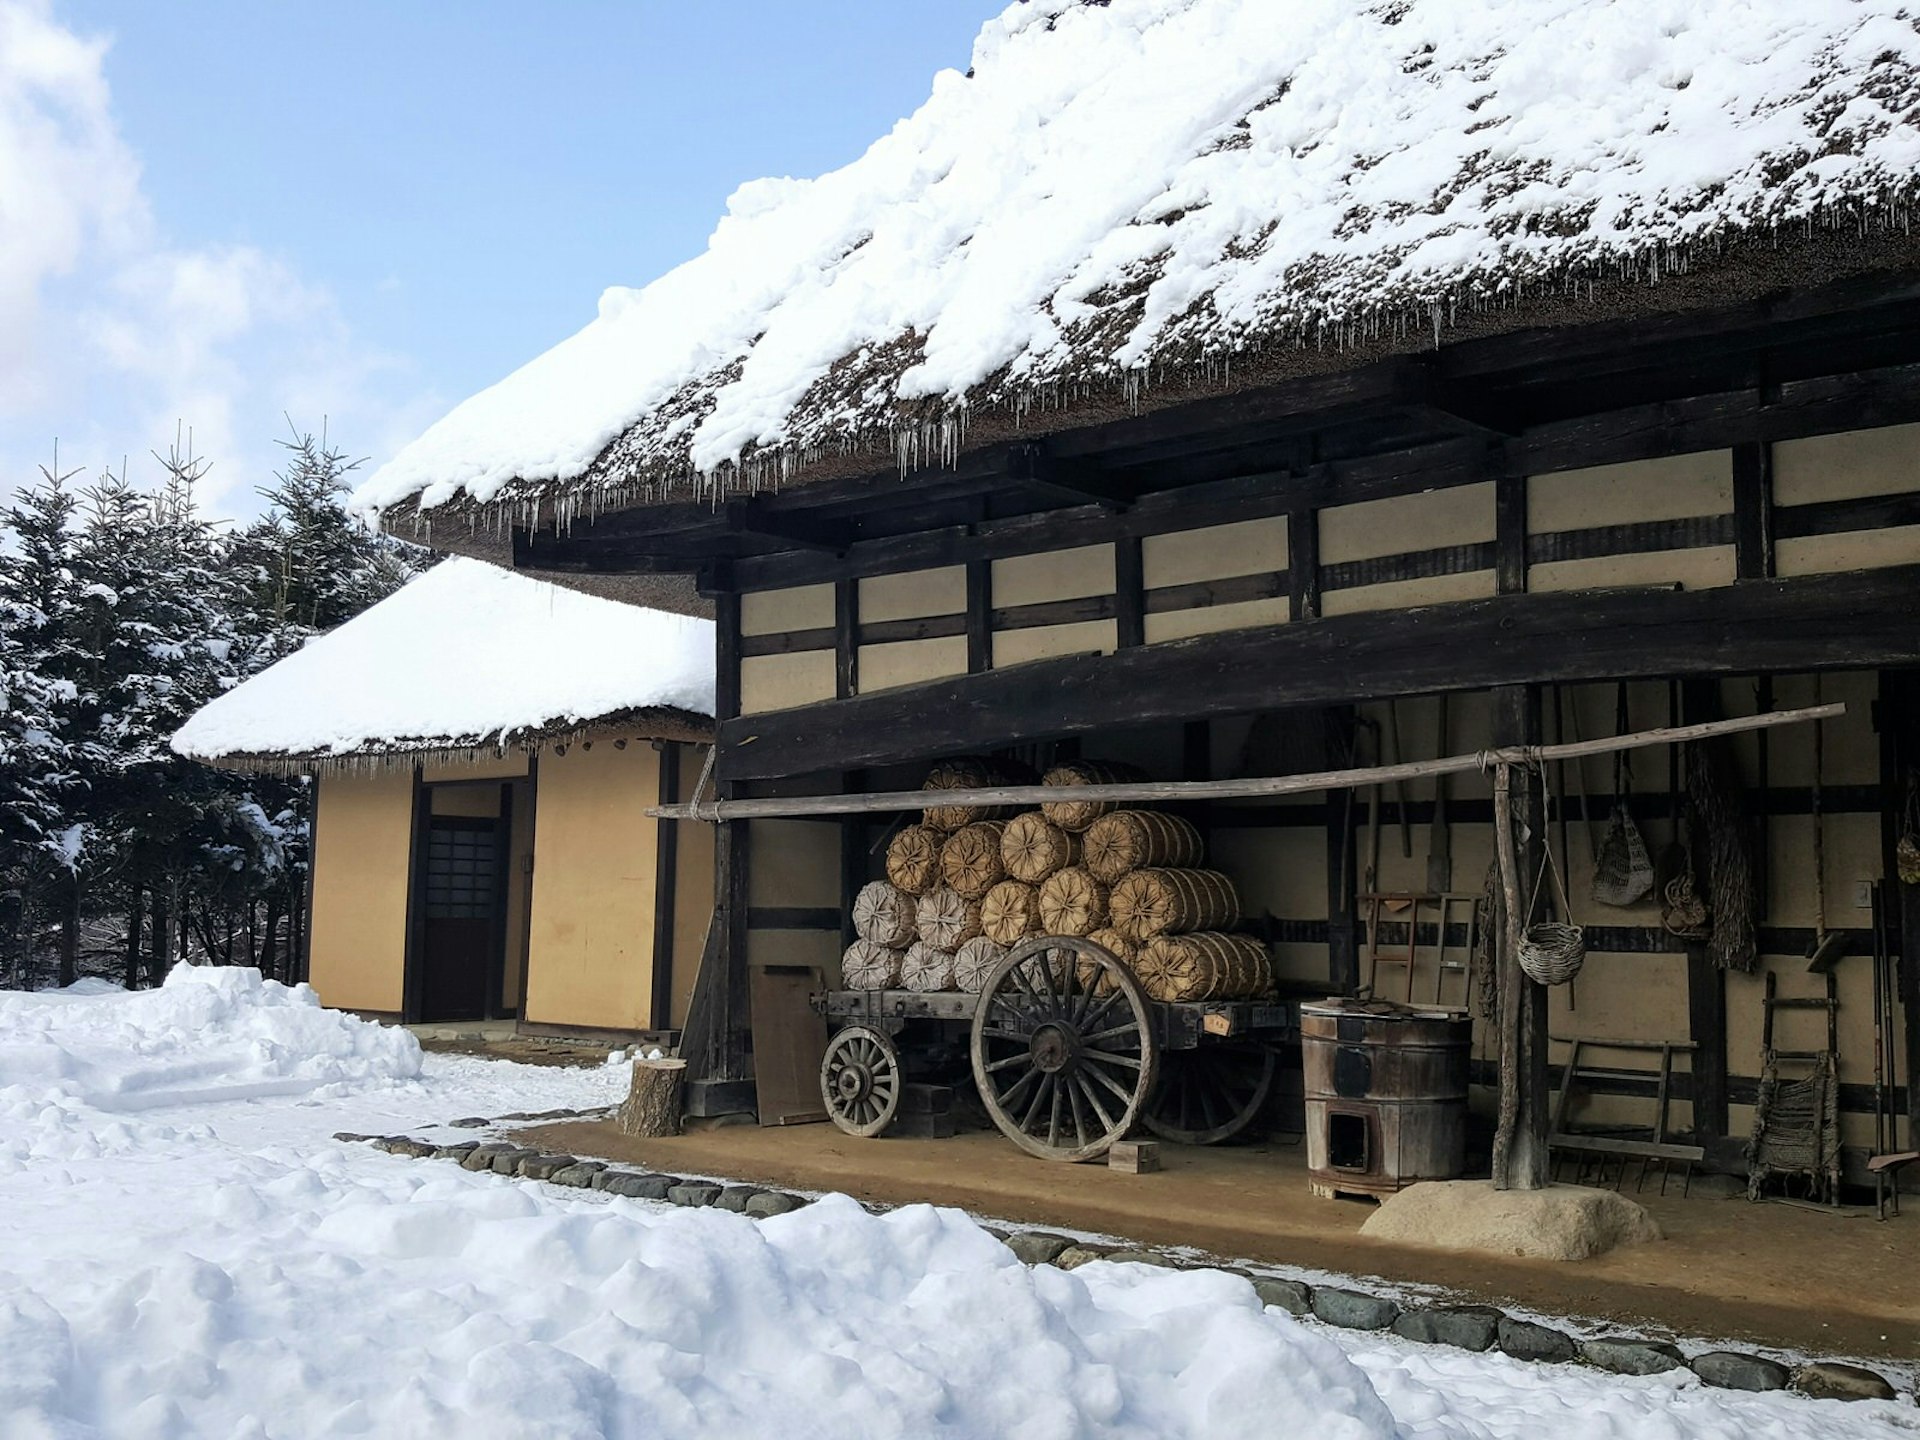 An old thatched-roof farmhouse with snow on the roof and on the ground outside, at Tono Furusato Village